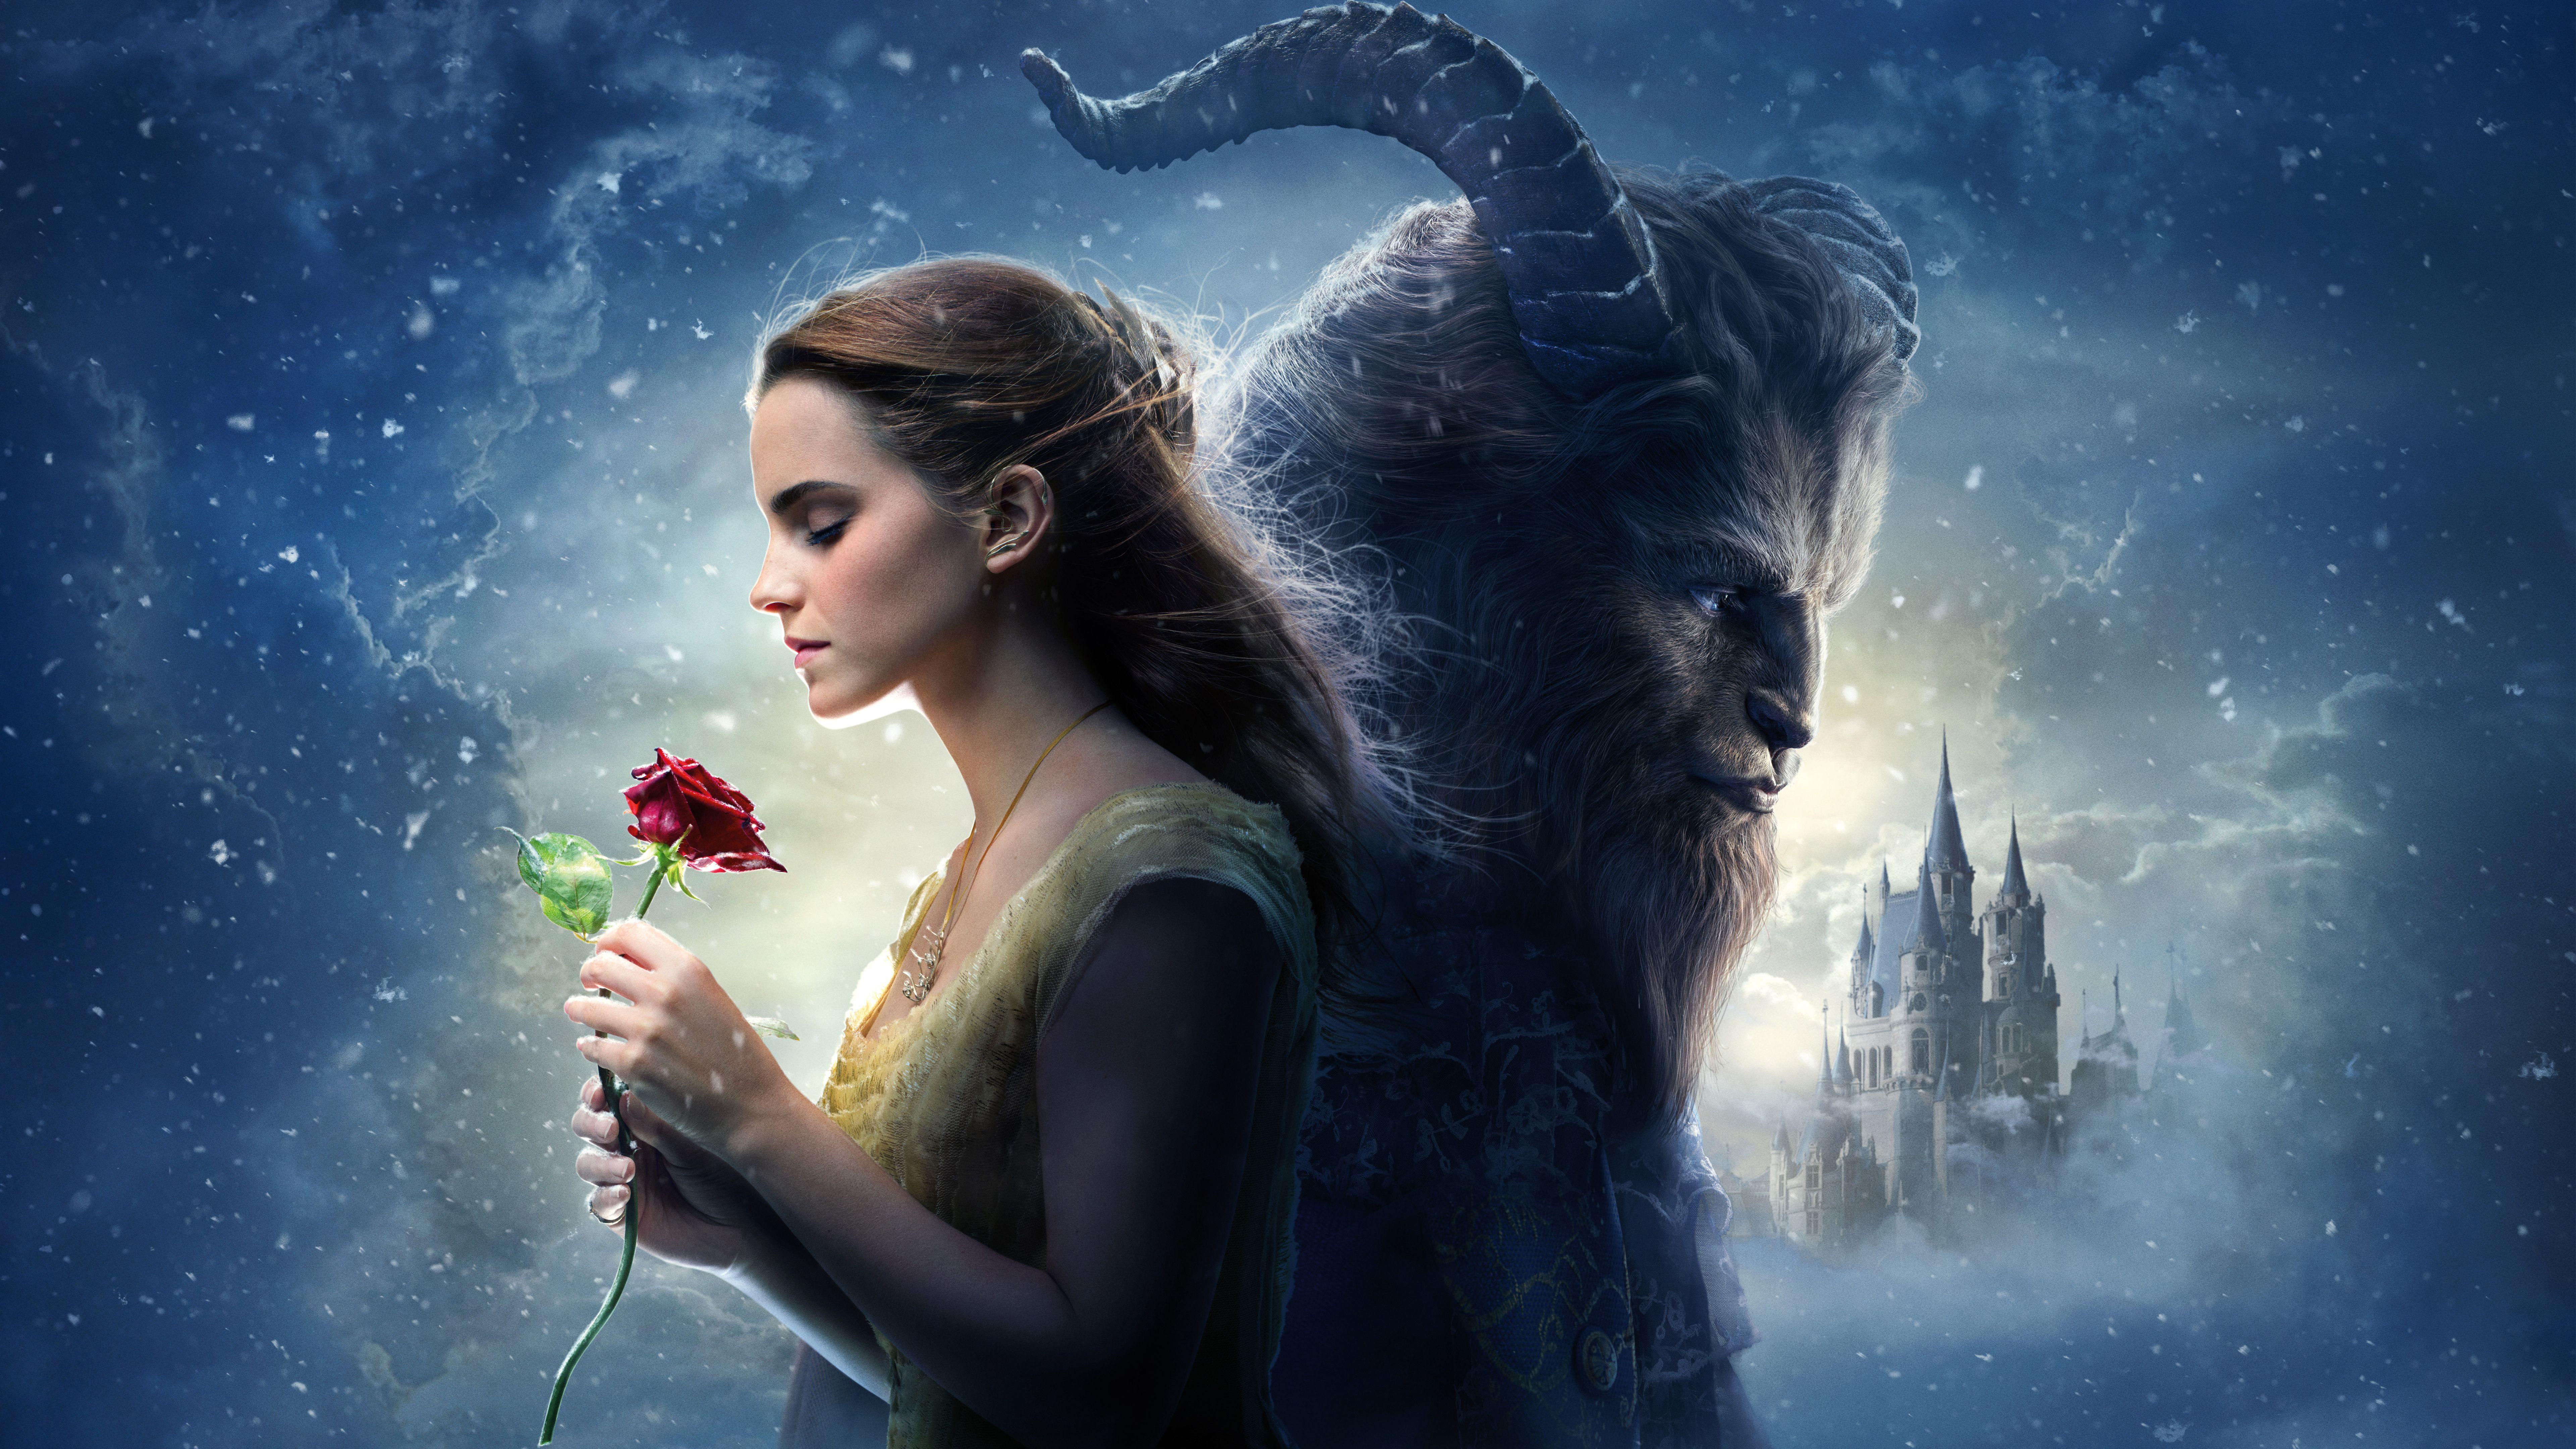 Beauty And The Beast Laptop Wallpapers Top Free Beauty And The Beast Laptop Backgrounds Wallpaperaccess